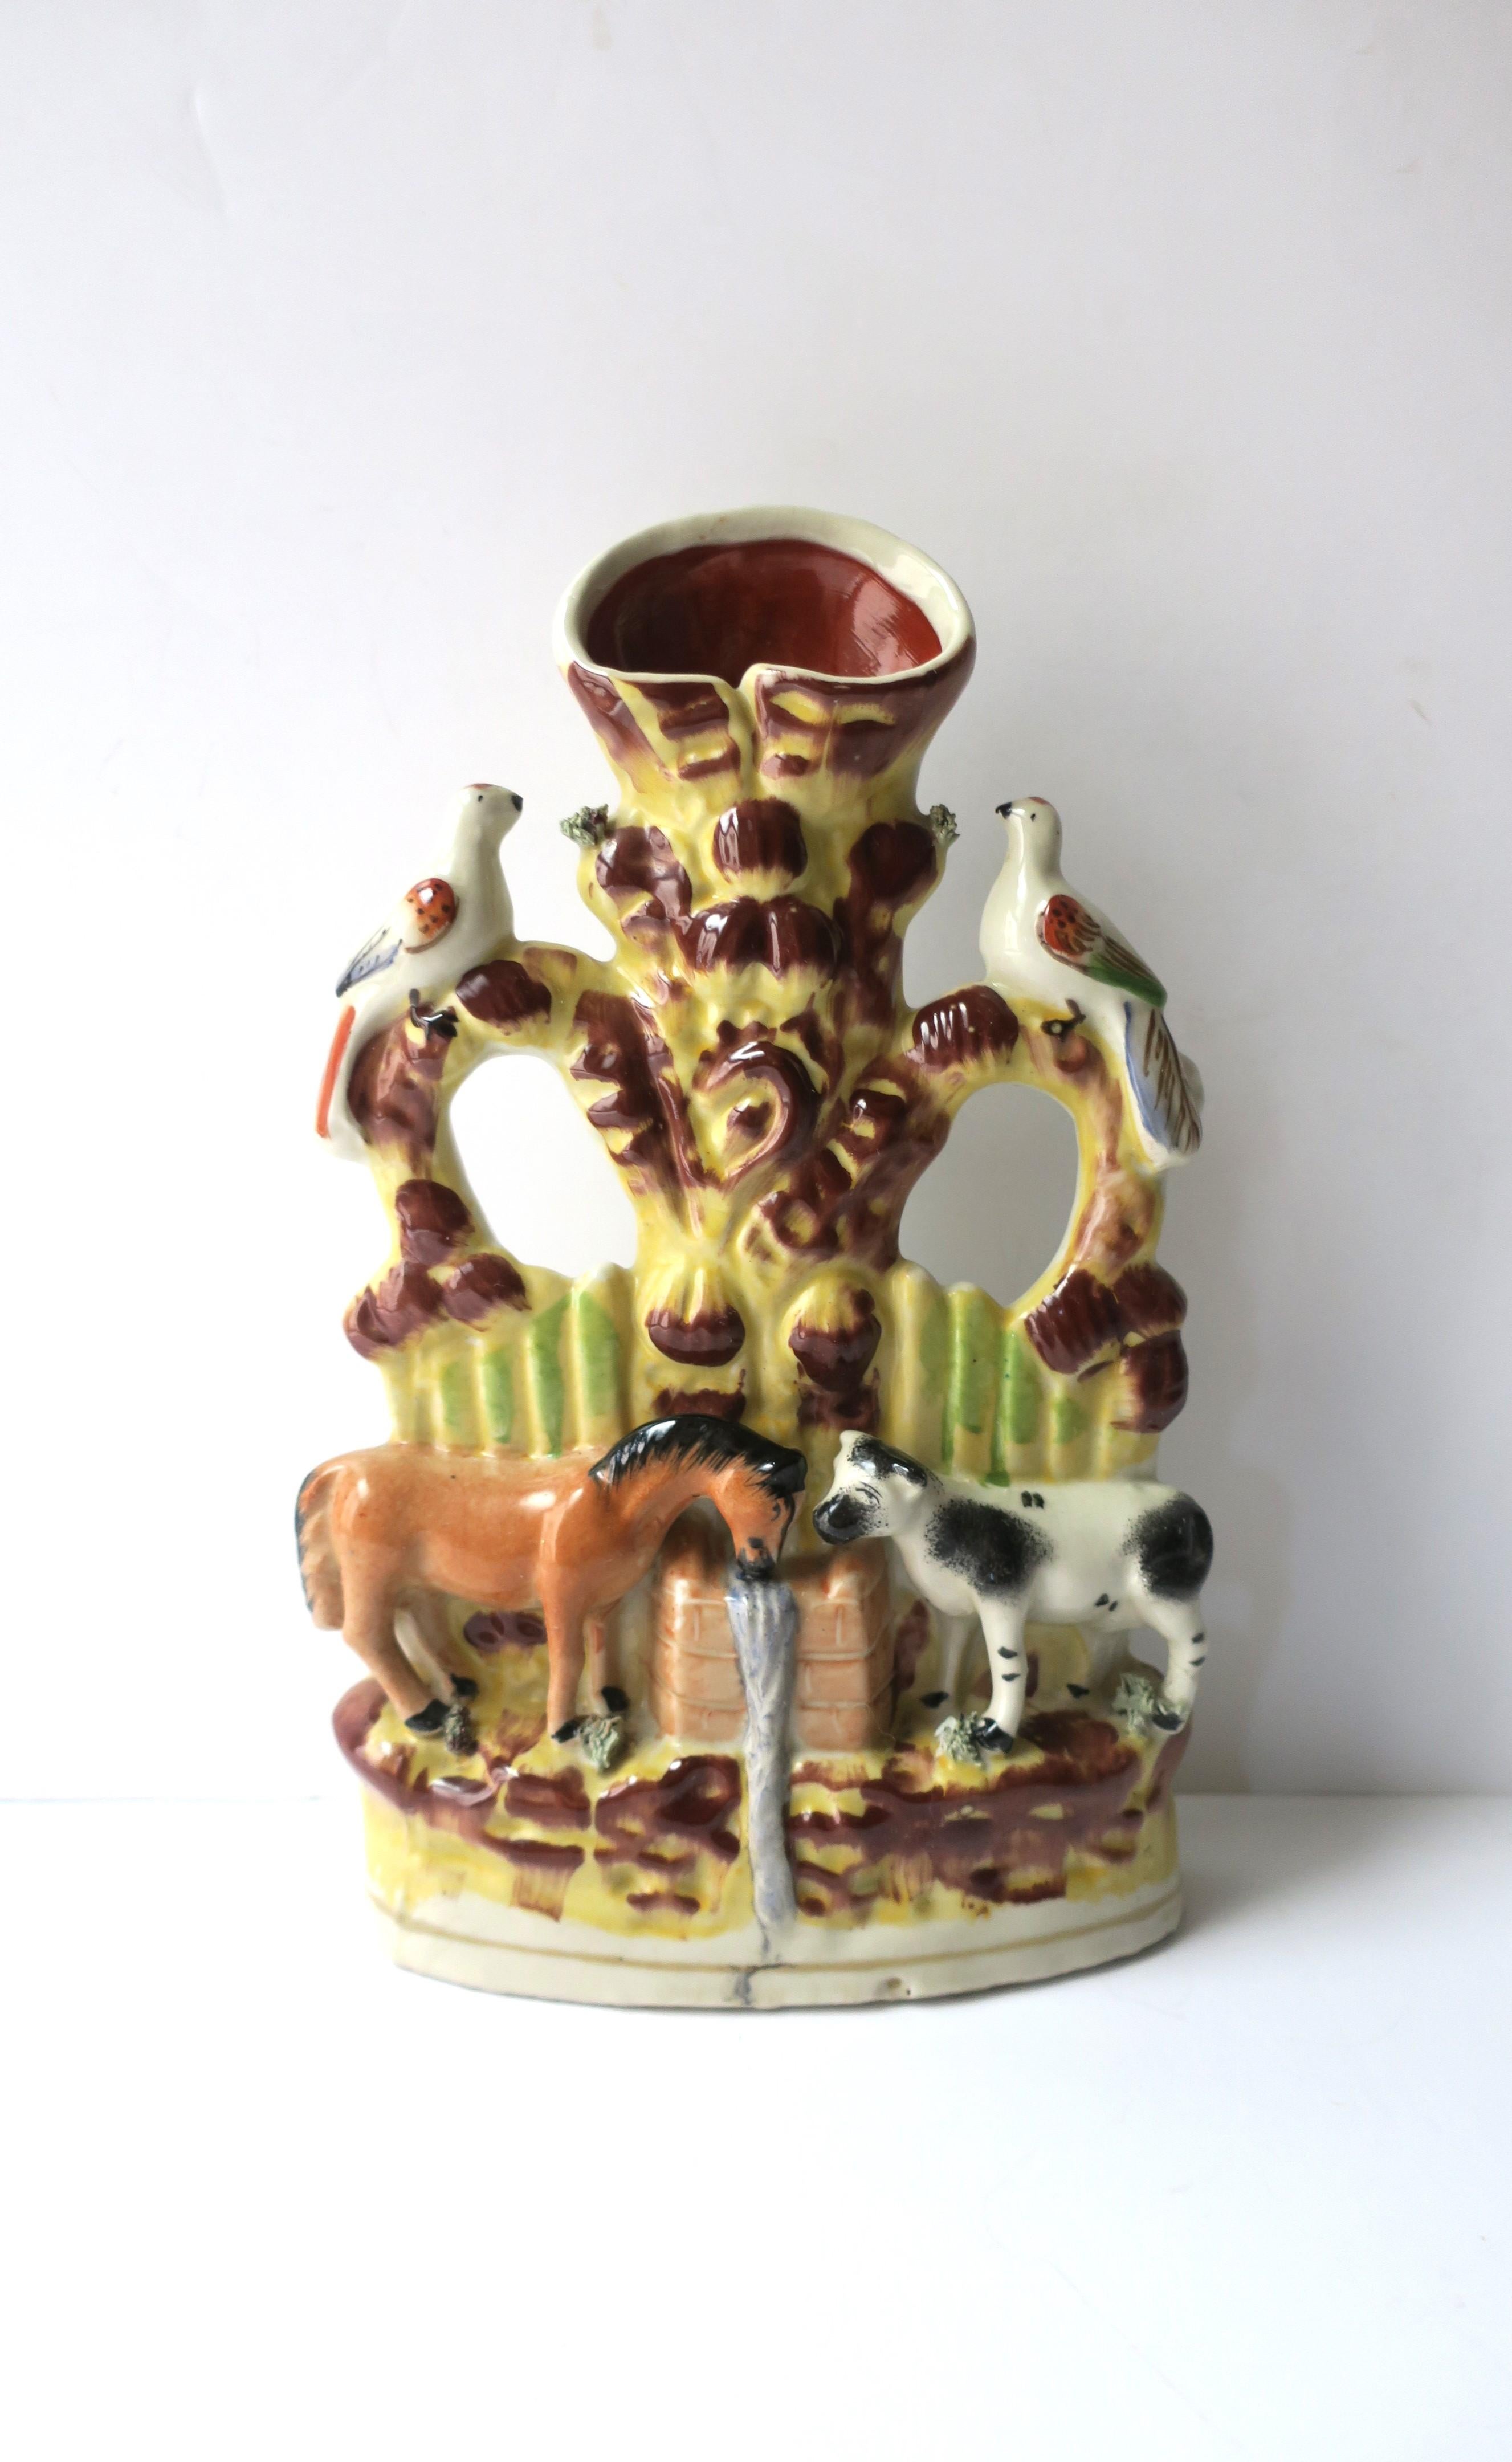 An animal farm scene pottery spill vase, Folk Art design, attributed to Staffordshire, circa early-20th century, England. A beautiful scene of dove birds on perch at top, and horse and cow below drinking from trough. Colors include yellow, red